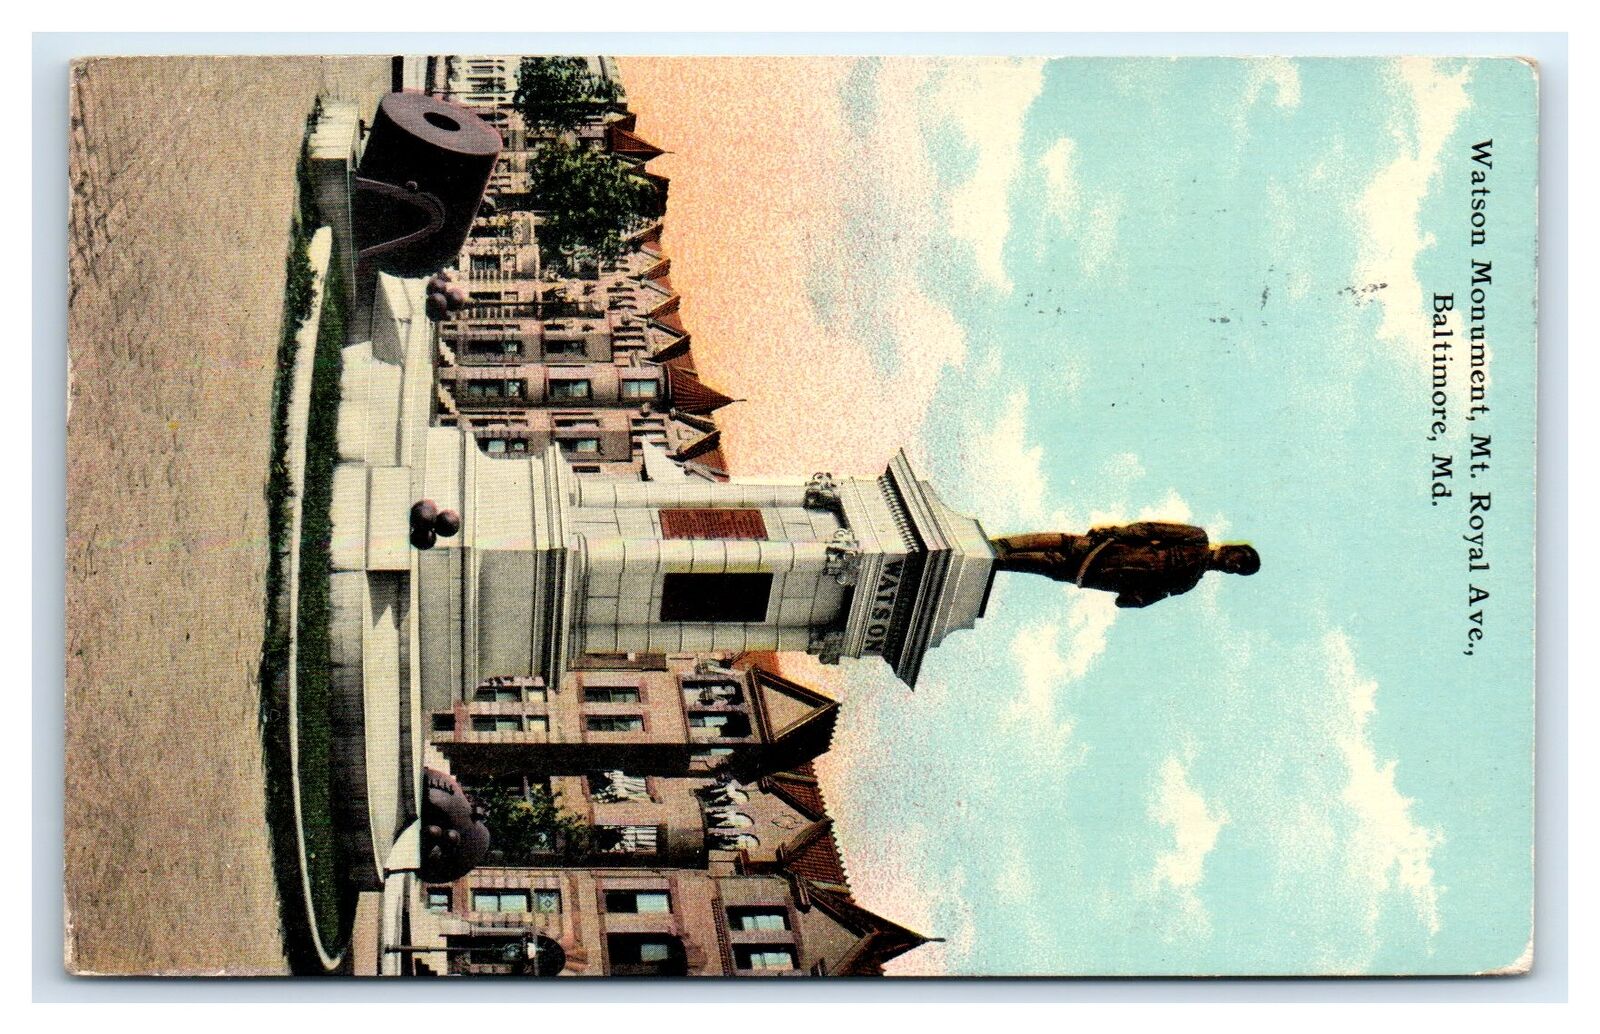 1913 BALTIMORE, MD Postcard-  WATSON MONUMENT MT ROYAL AVE BALTIMORE MD